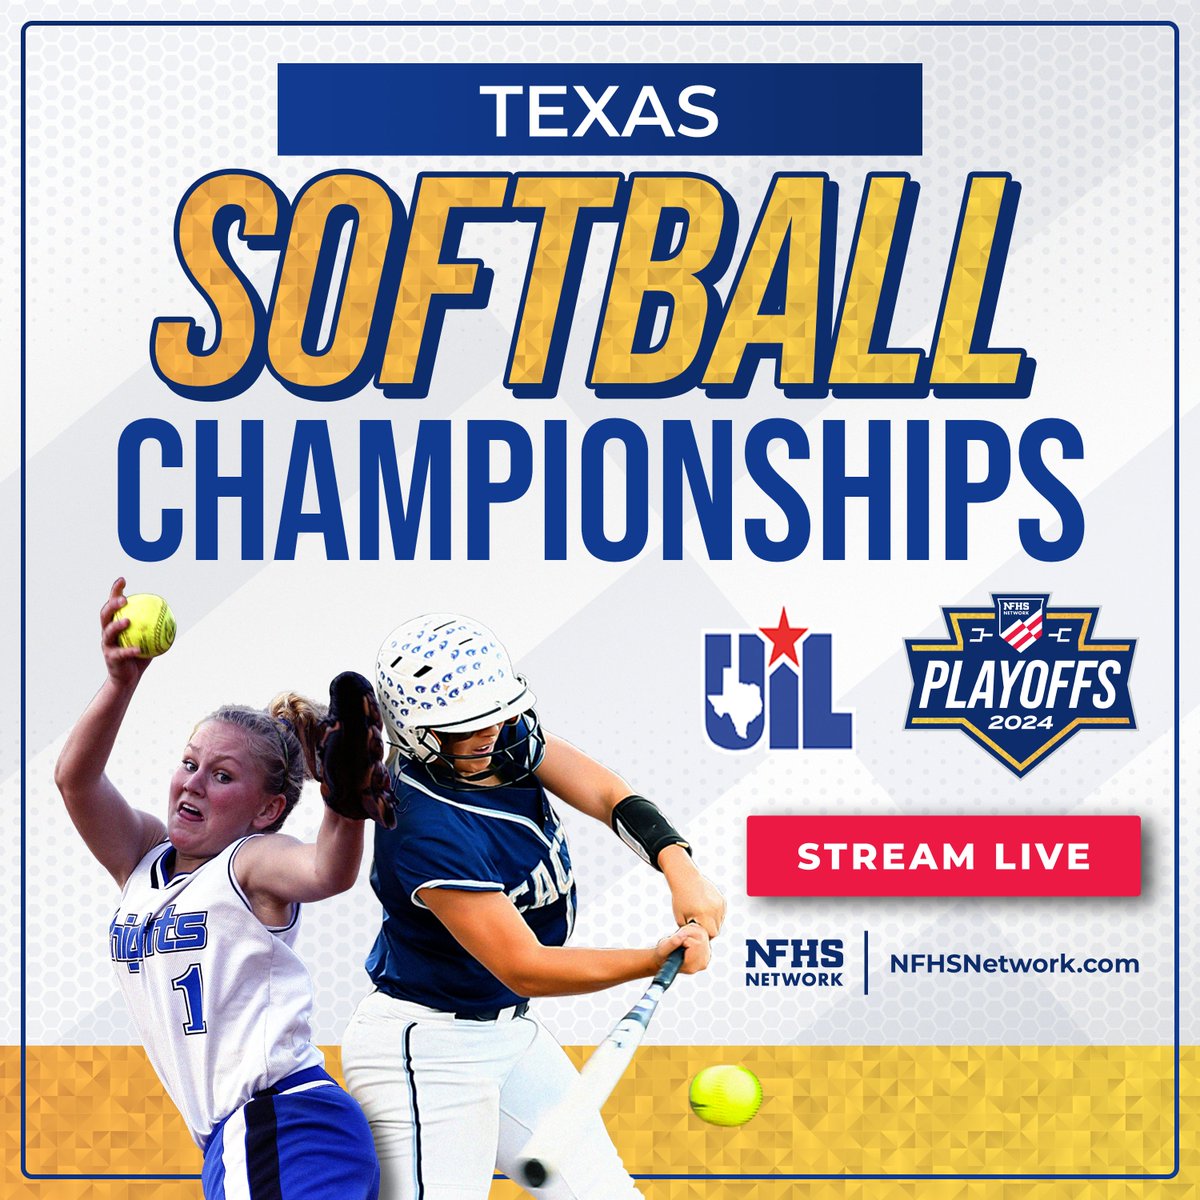 @uiltexas Don't miss the action from the 2024 UIL Softball Semifinals & Championships on the #NFHSNetwork today! 🥎 Watch live through the OFFICIAL link here: bit.ly/47mYZrC ✅